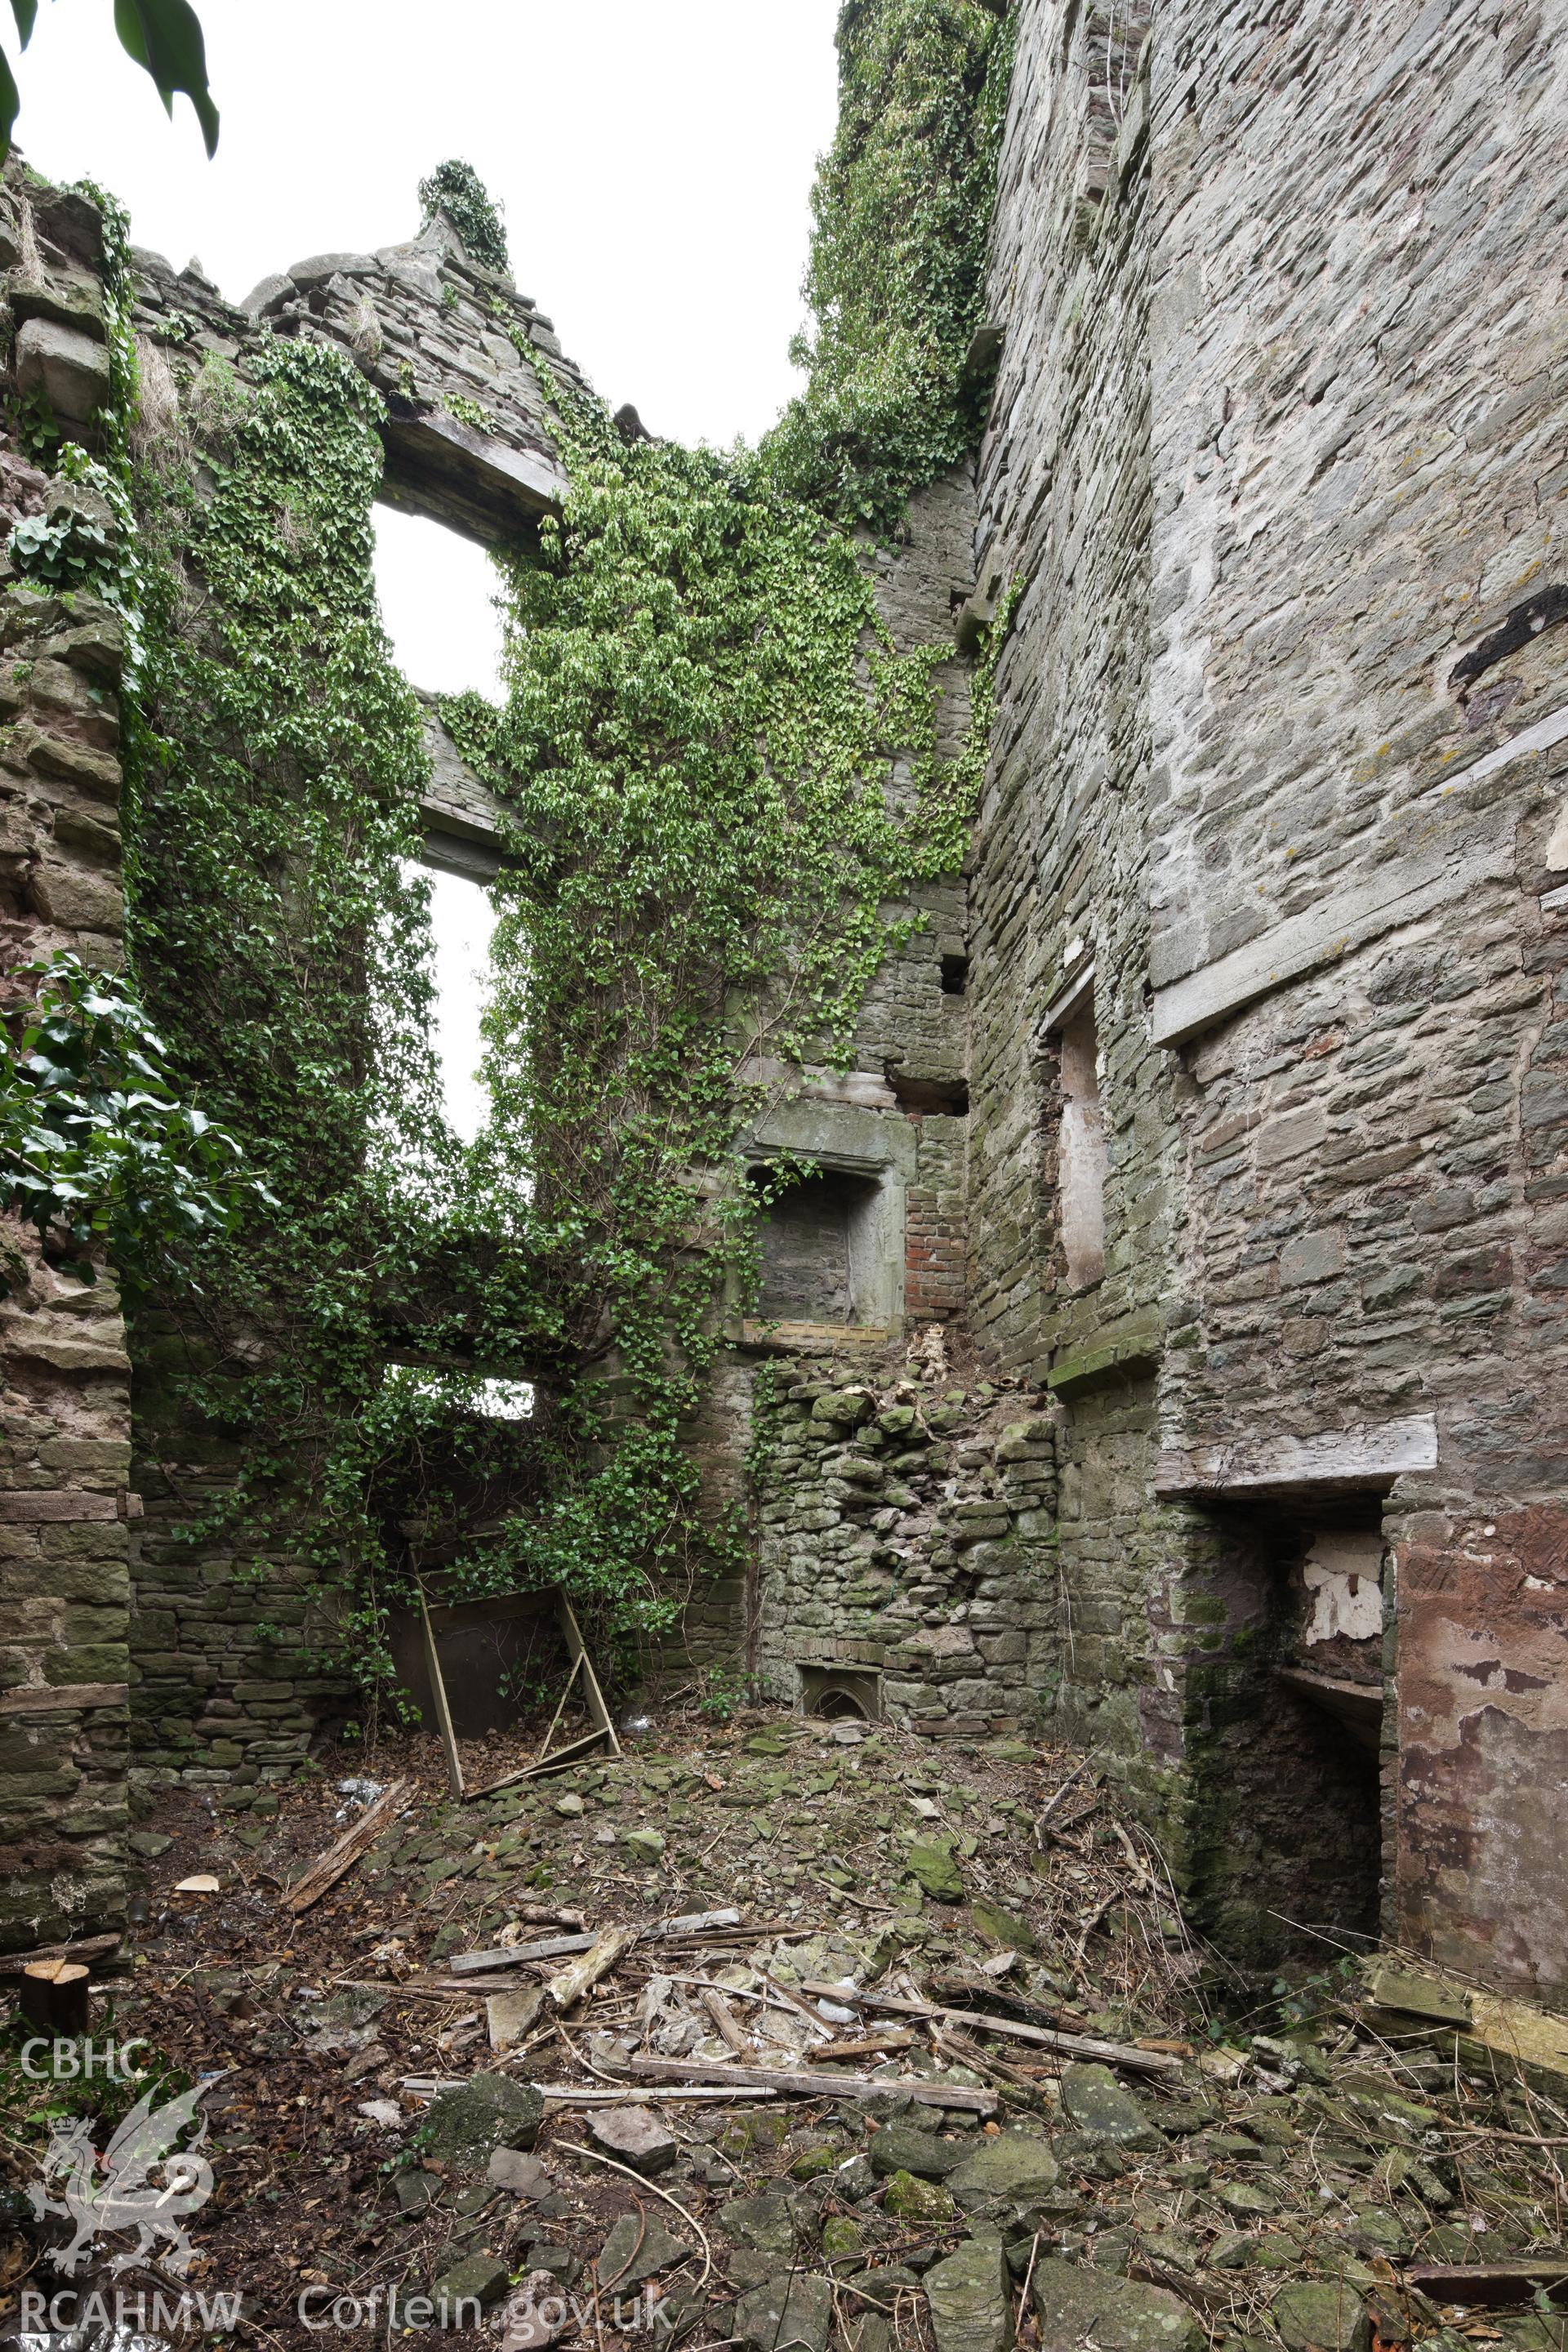 Groundfloor view of ruined hall and study, from the south.